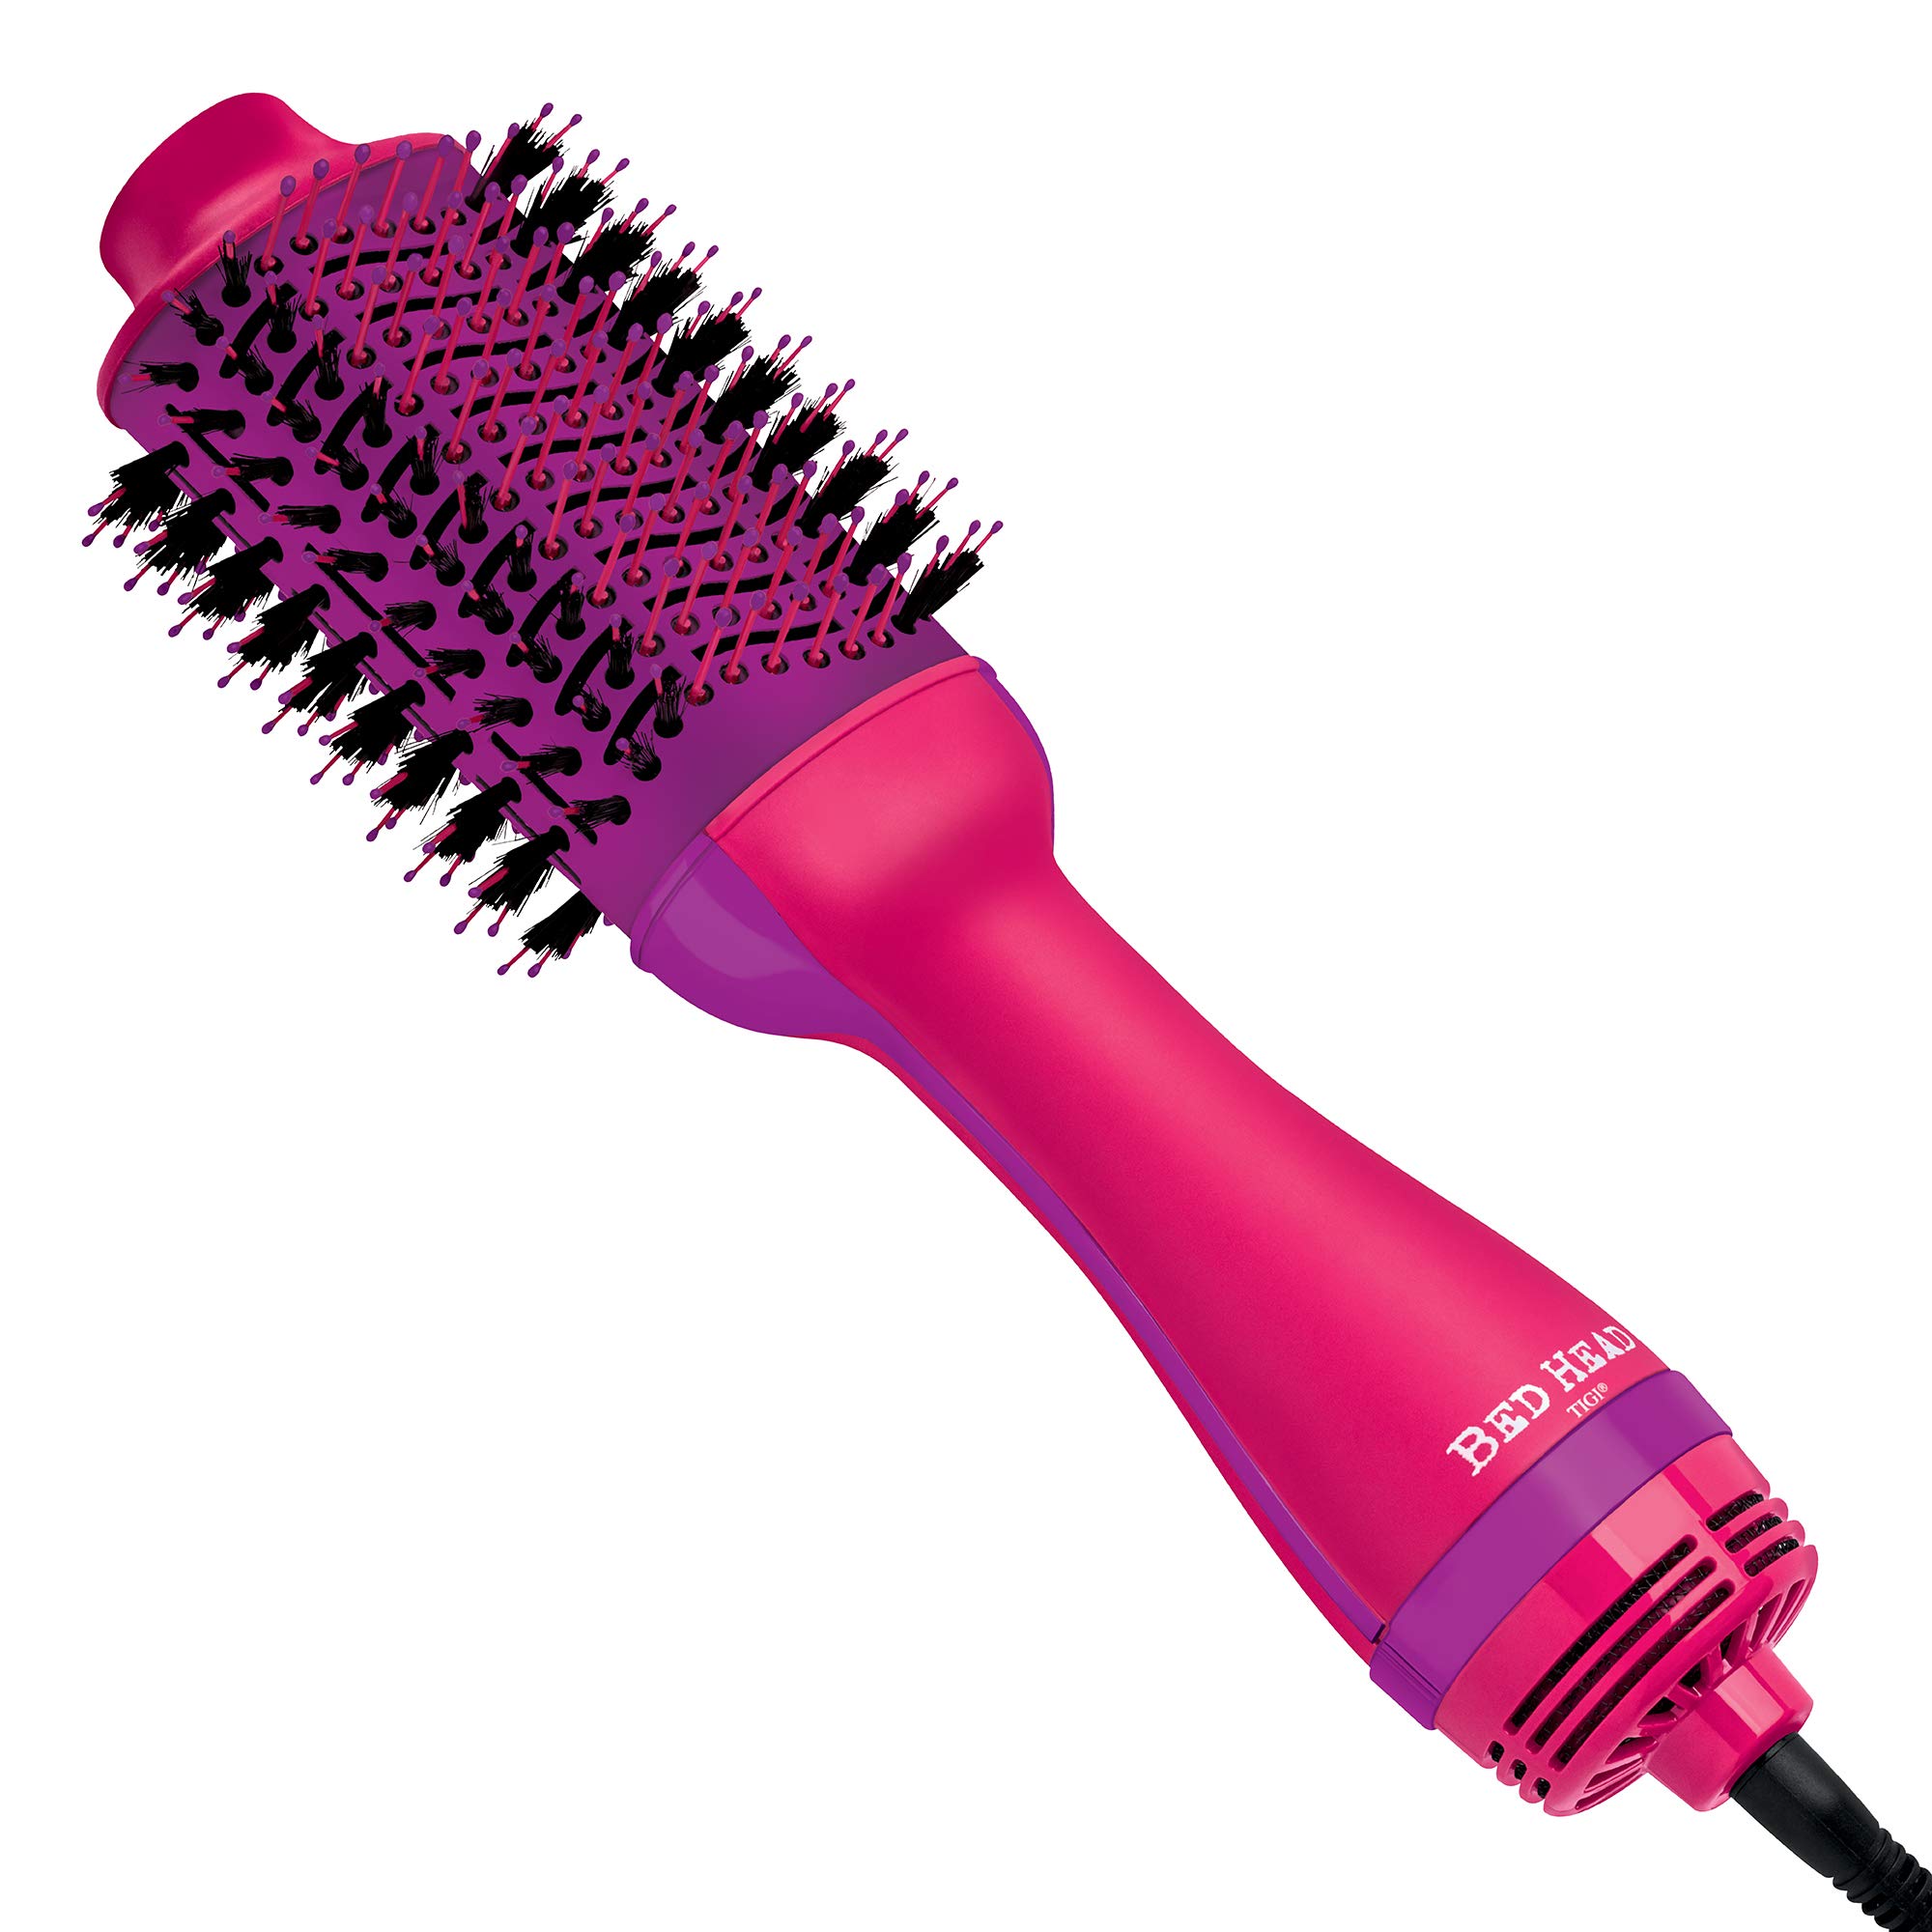 Bed Head One Step Volumizer and Hair Dryer | Dry, Straighten, Texture, Style in One Step (Pink)